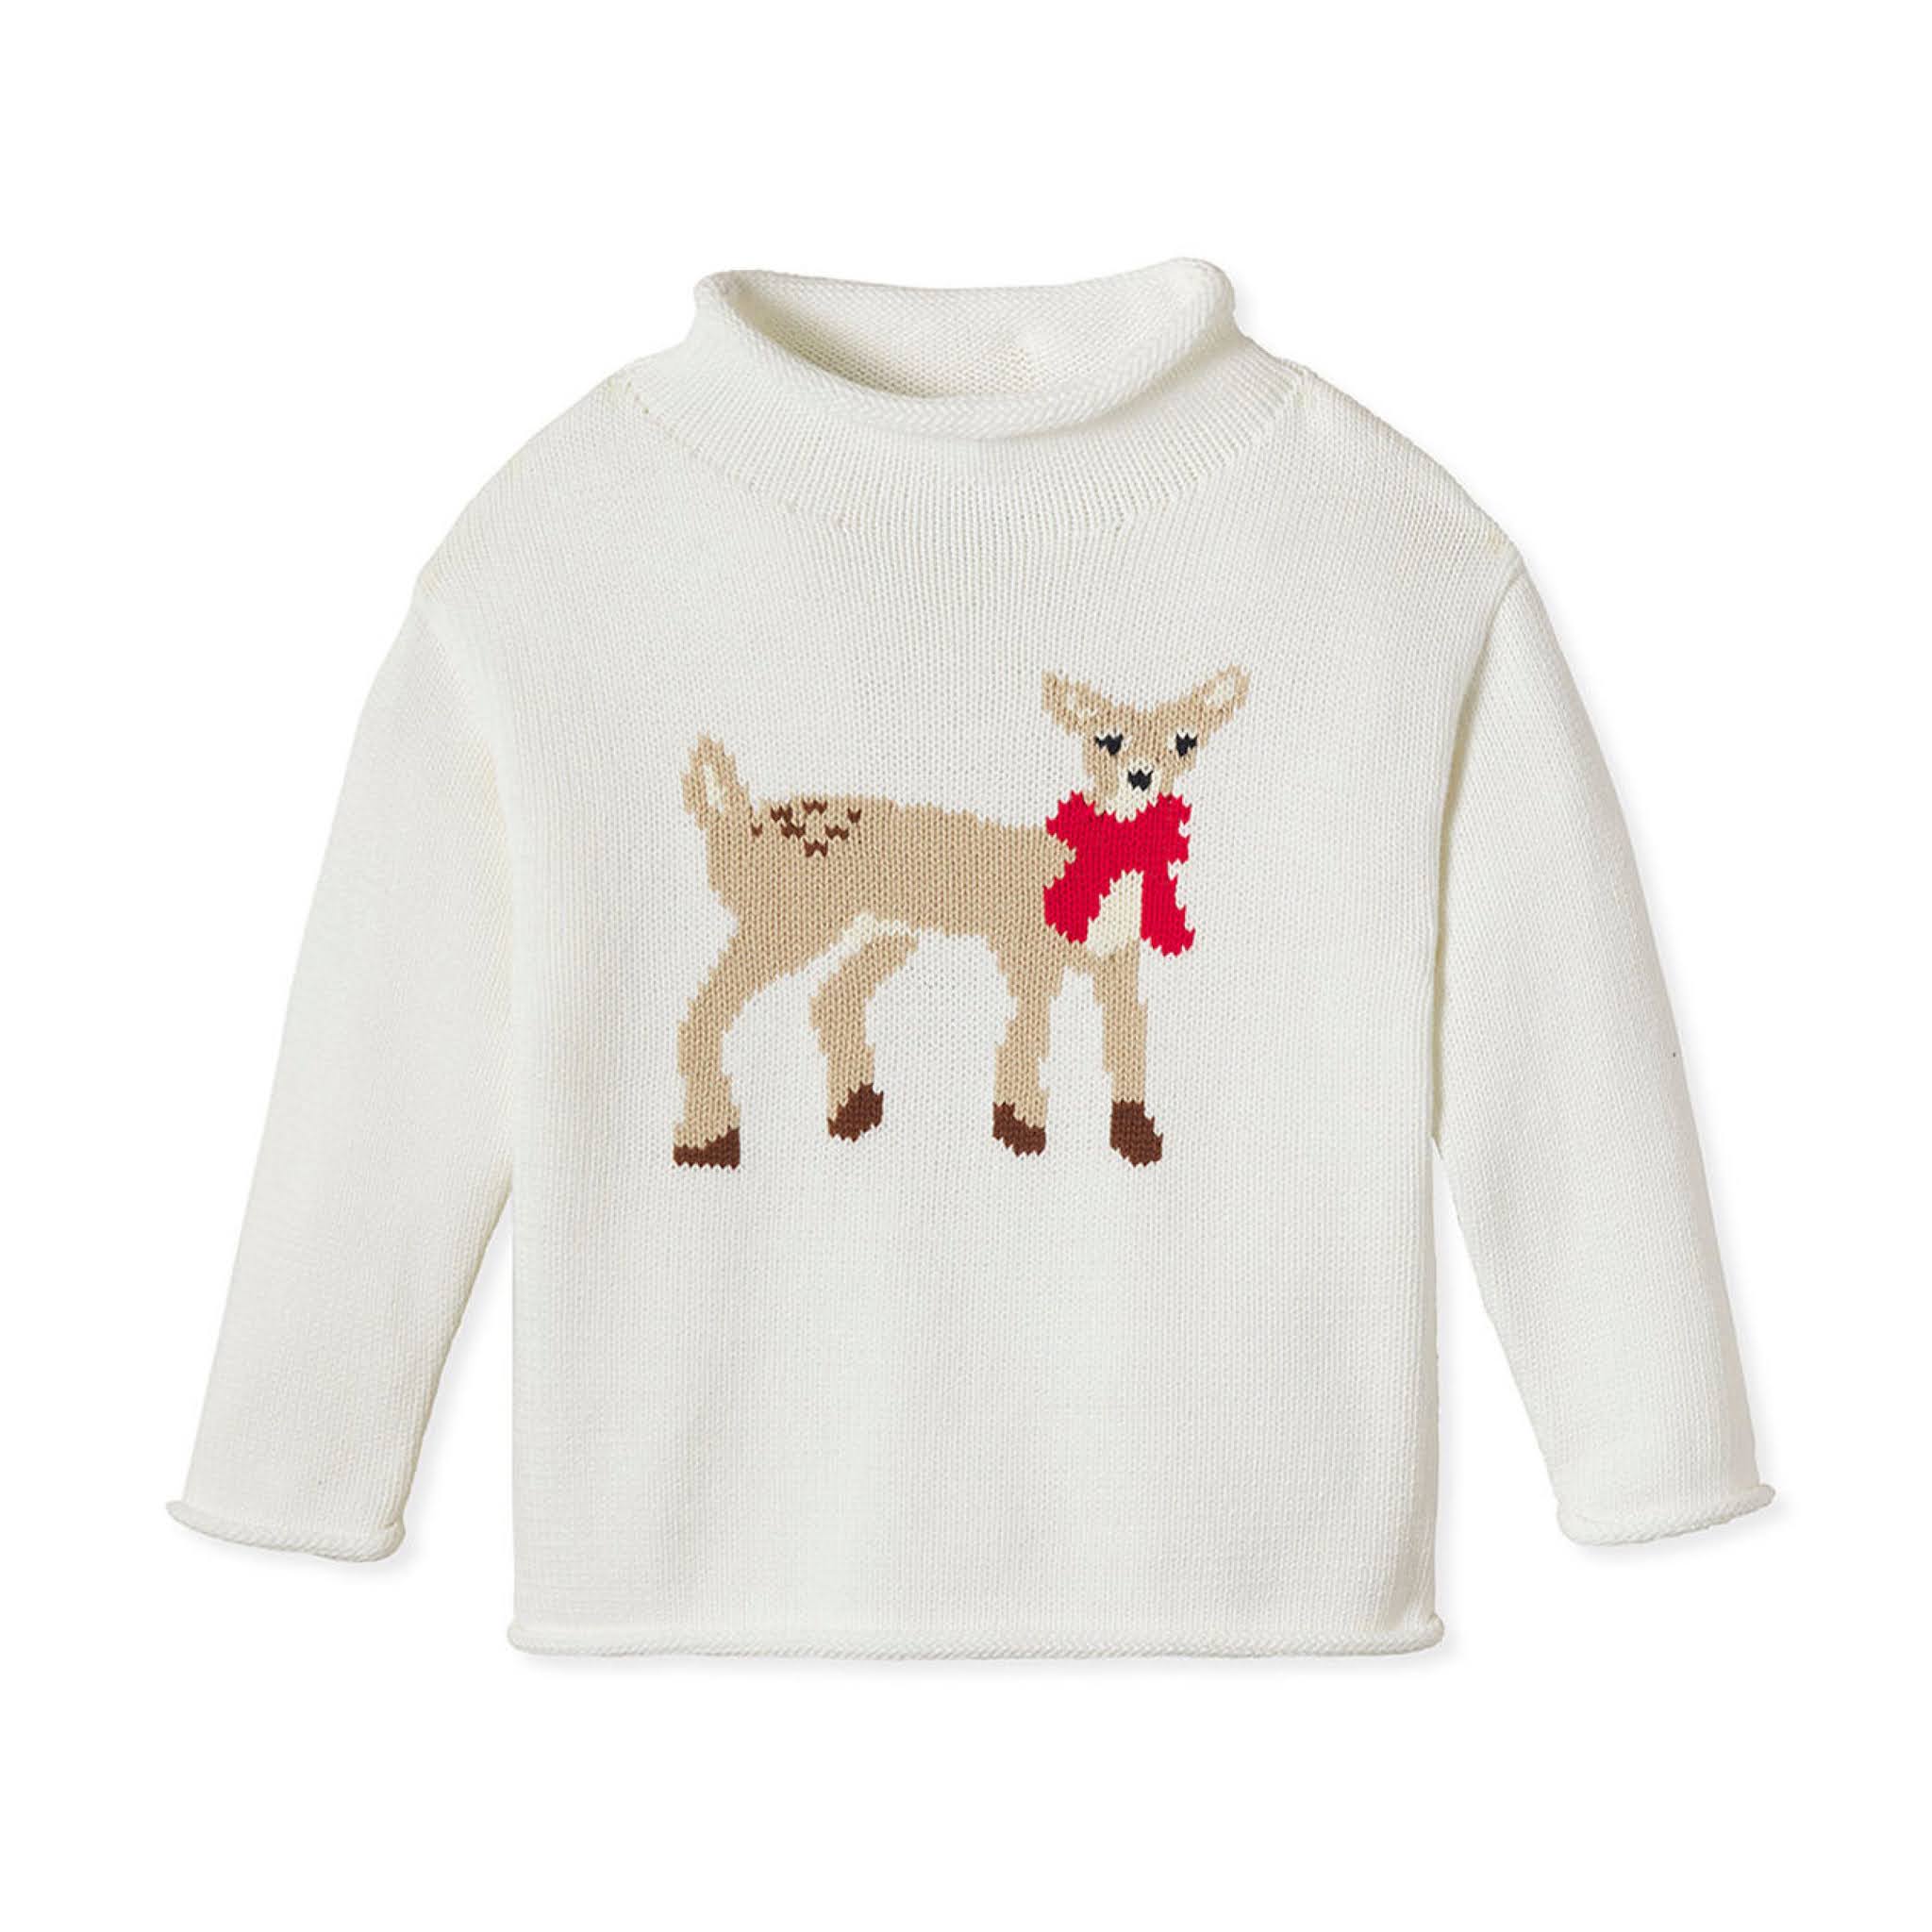 Kids Deer Holiday Sweater from Neiman Marcus